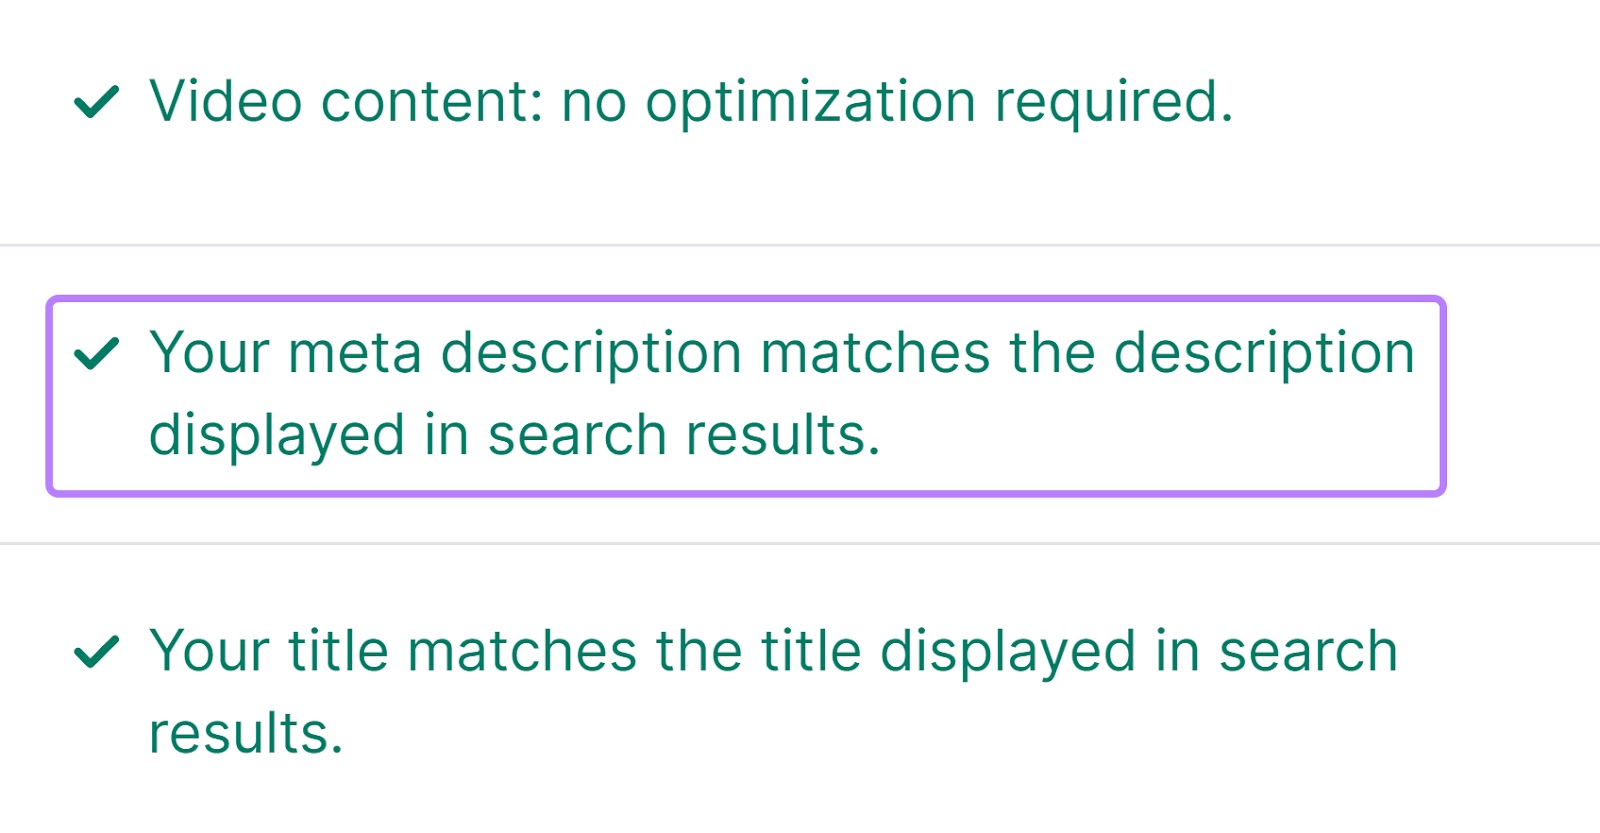 "Your meta description matches the description displayed in search results." message